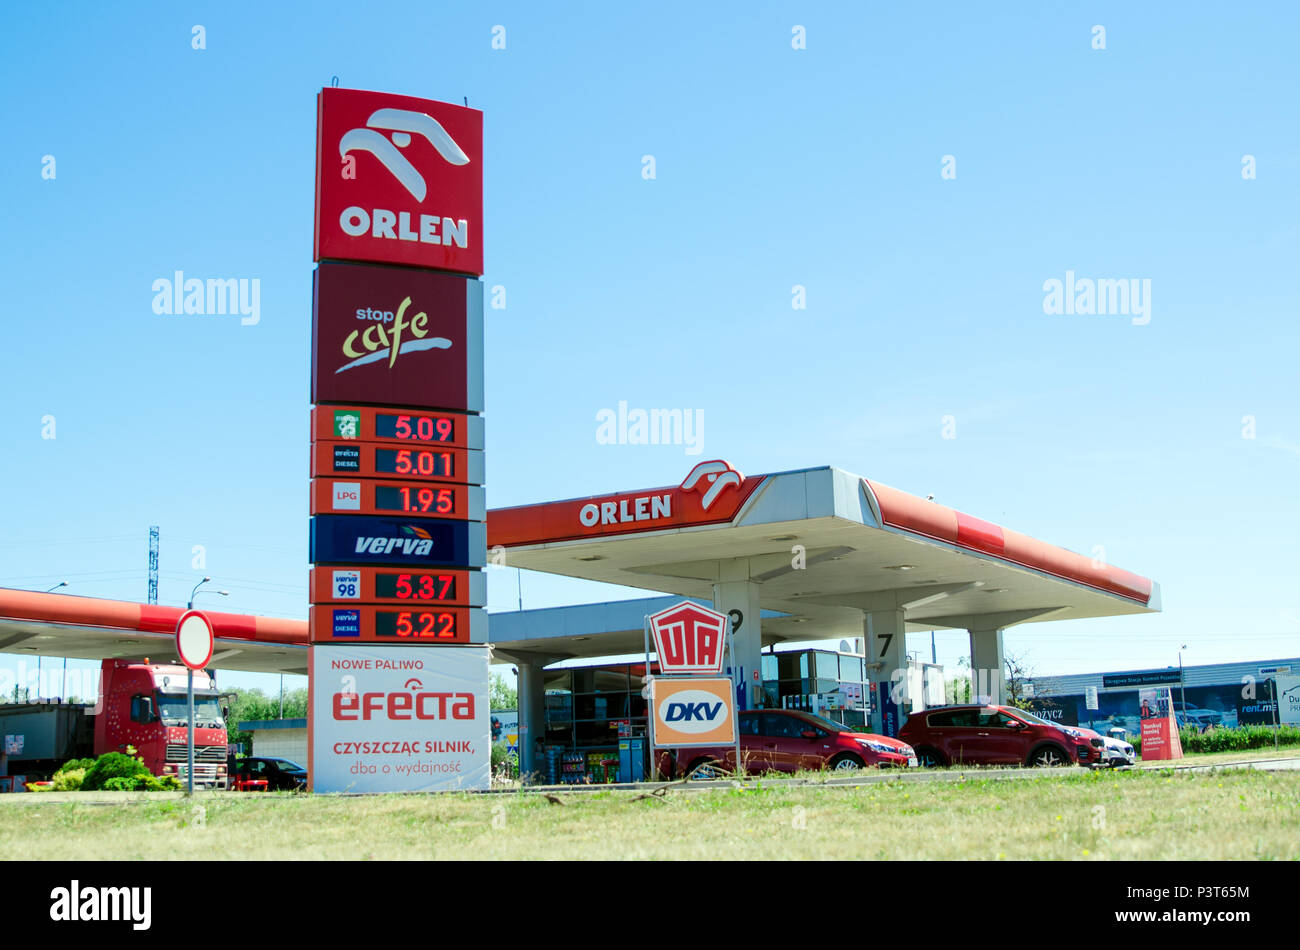 WROCLAW, POLAND - JUNE, 2018. Orlen gas station in Wroclaw, Poland. Orlen is the largest Polish company. Stock Photo